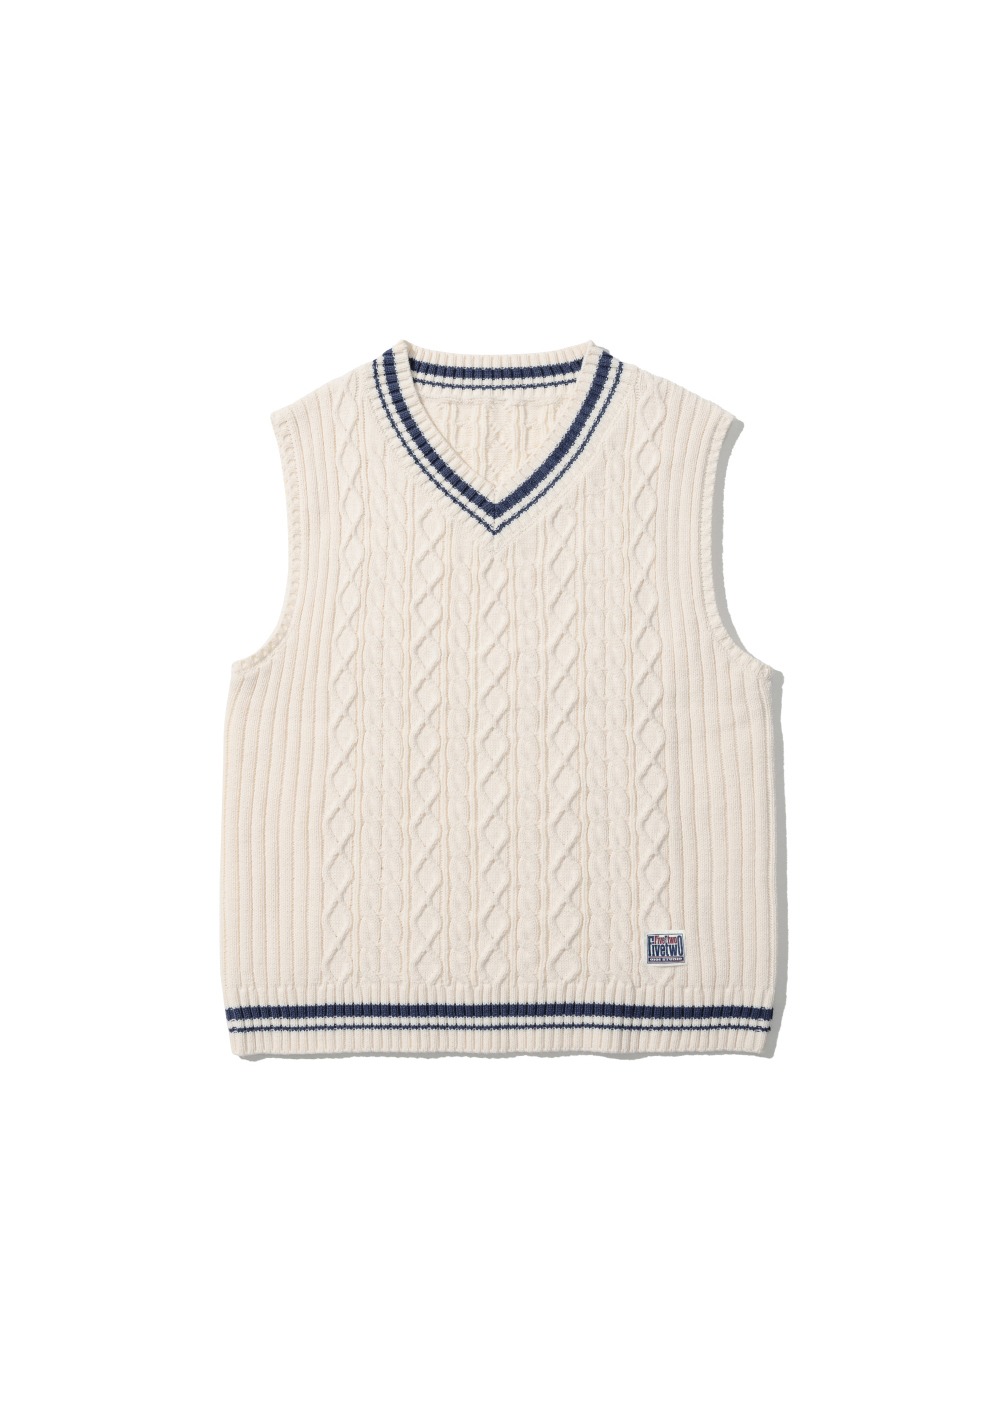 OIOI_MIXED CABLE KNIT VEST_52BHFWCVT04